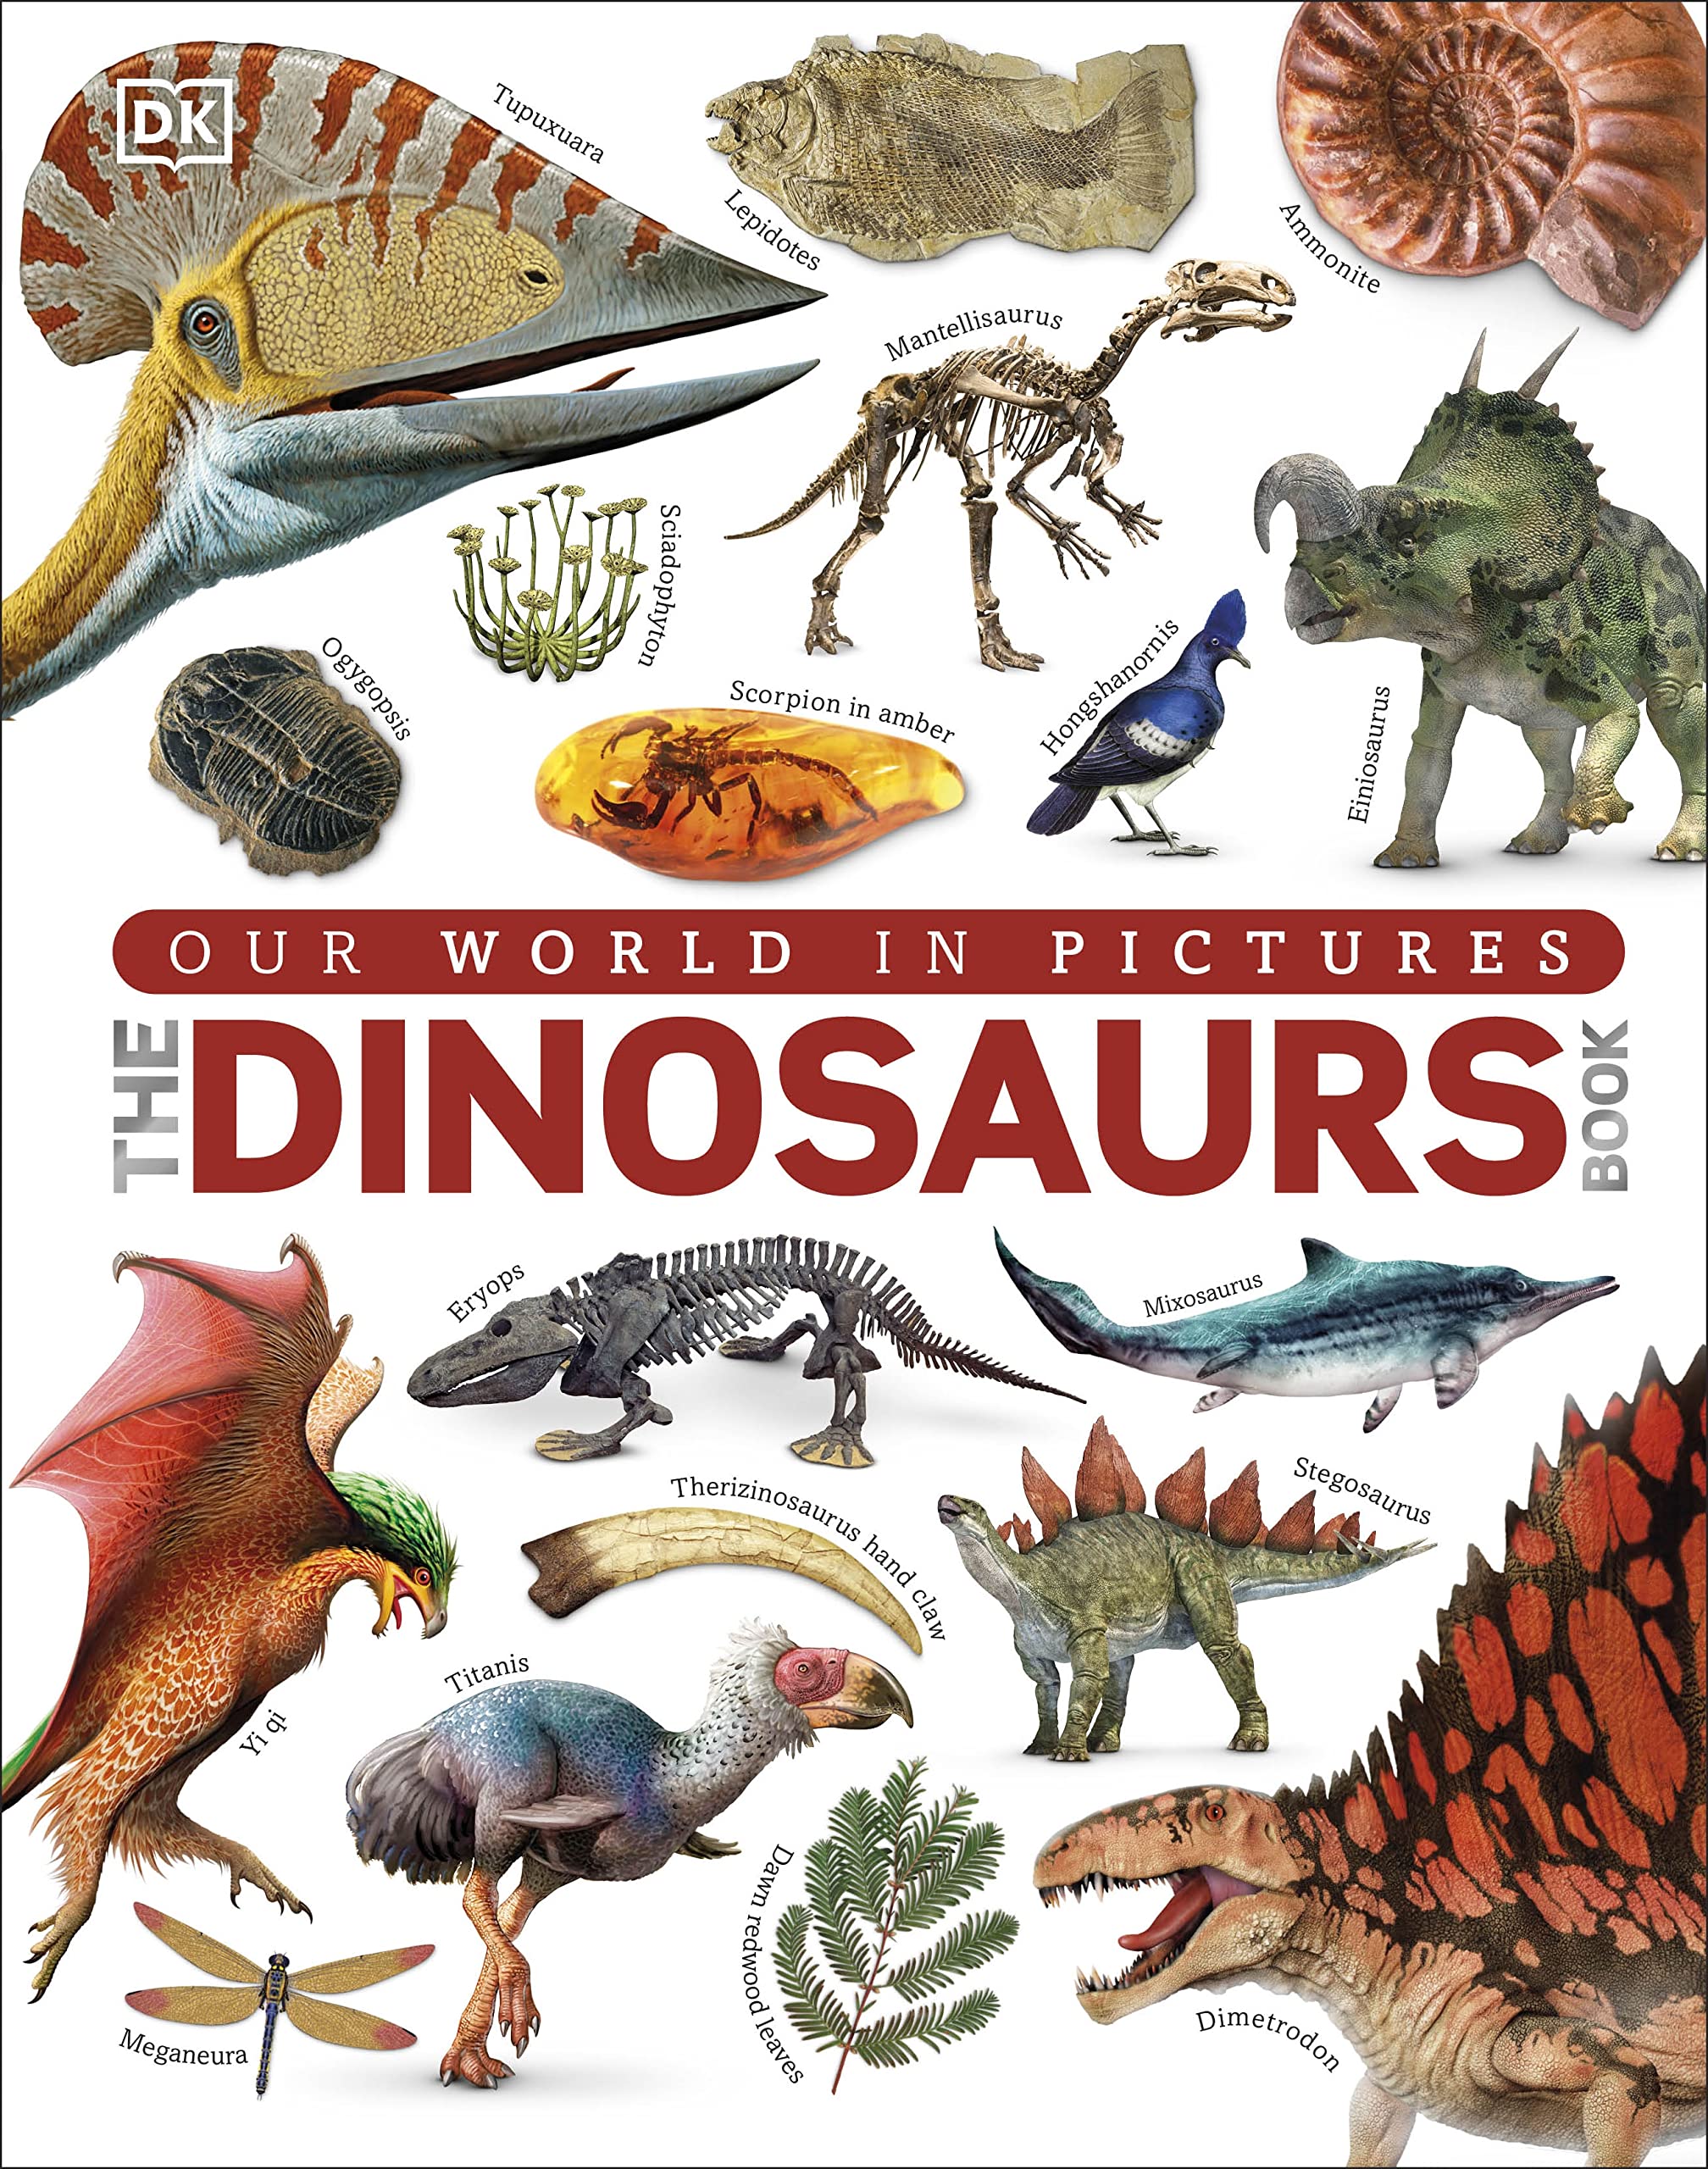 The Dinosaurs Book